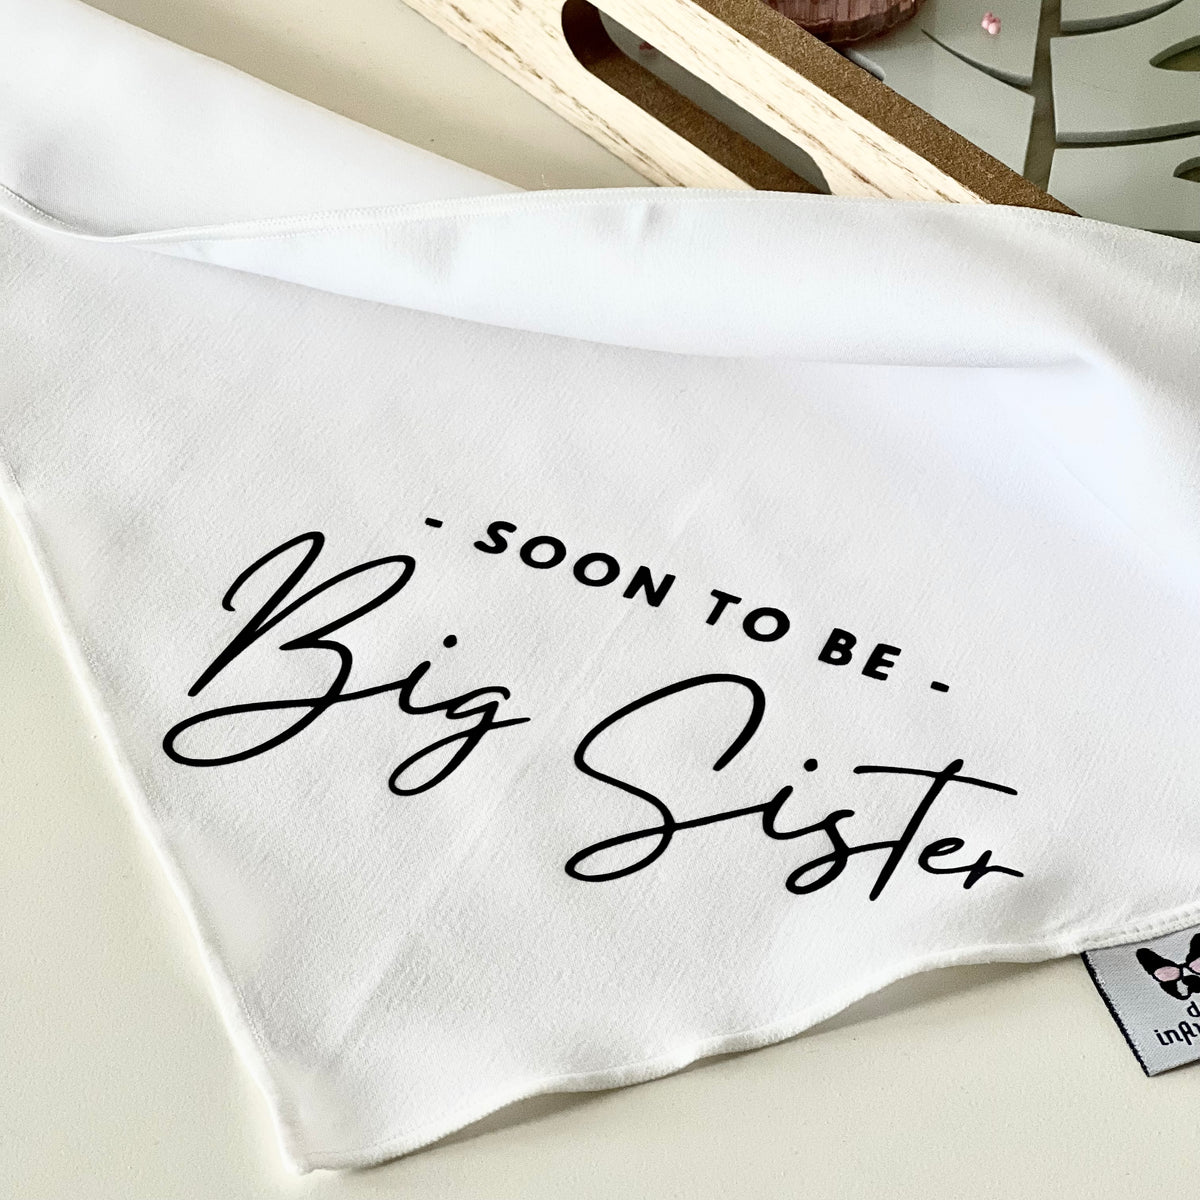 Dog Bandana - " Soon to be - Big Sister" - Pregnancy Announcement - Baby Reveal